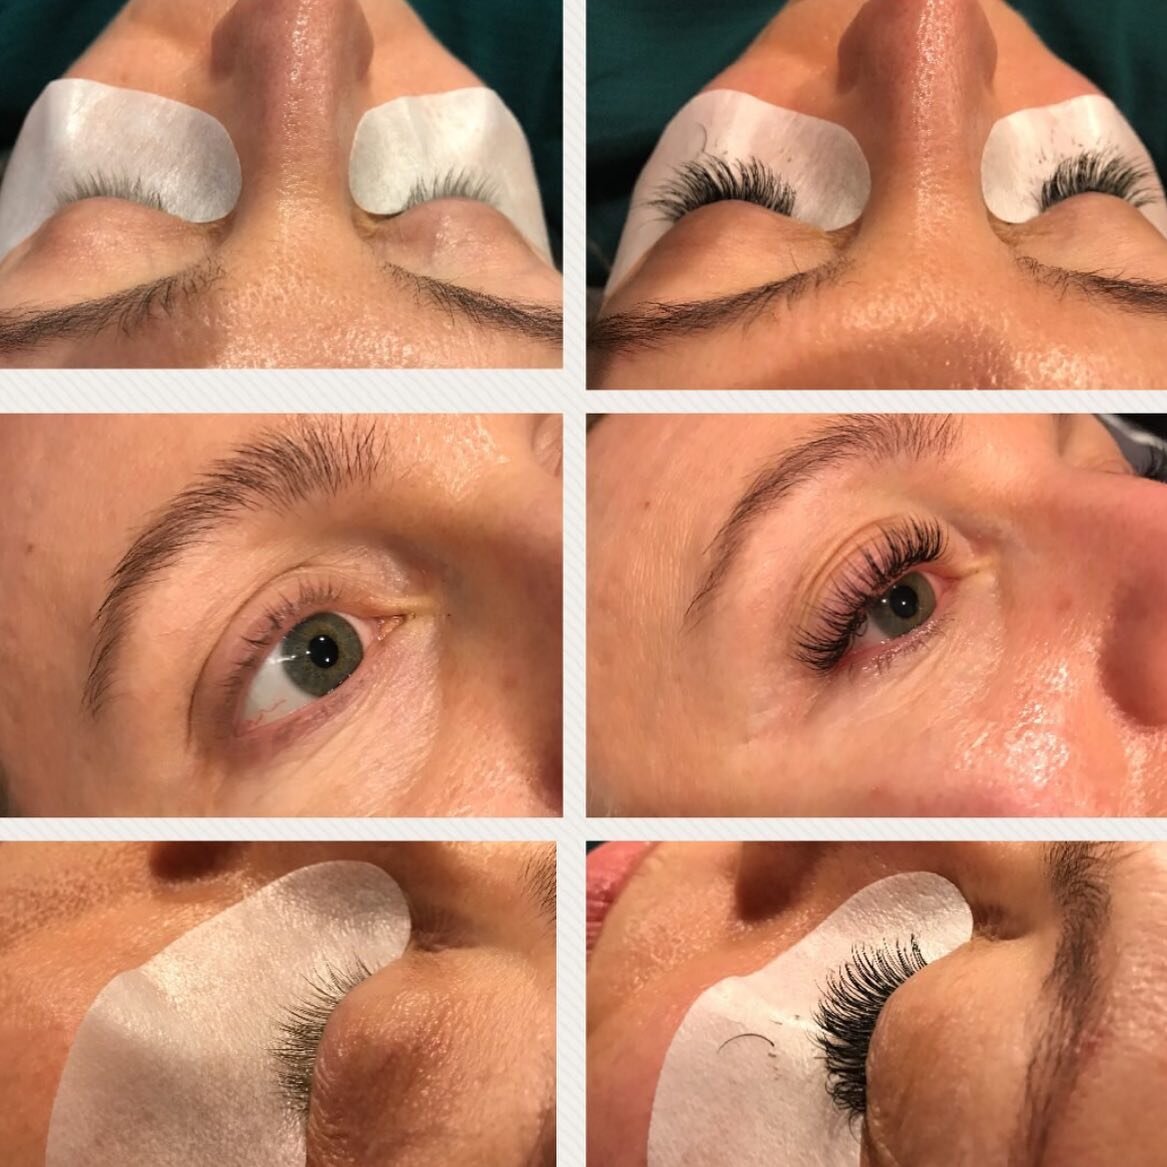 Before/after classic lash extensions